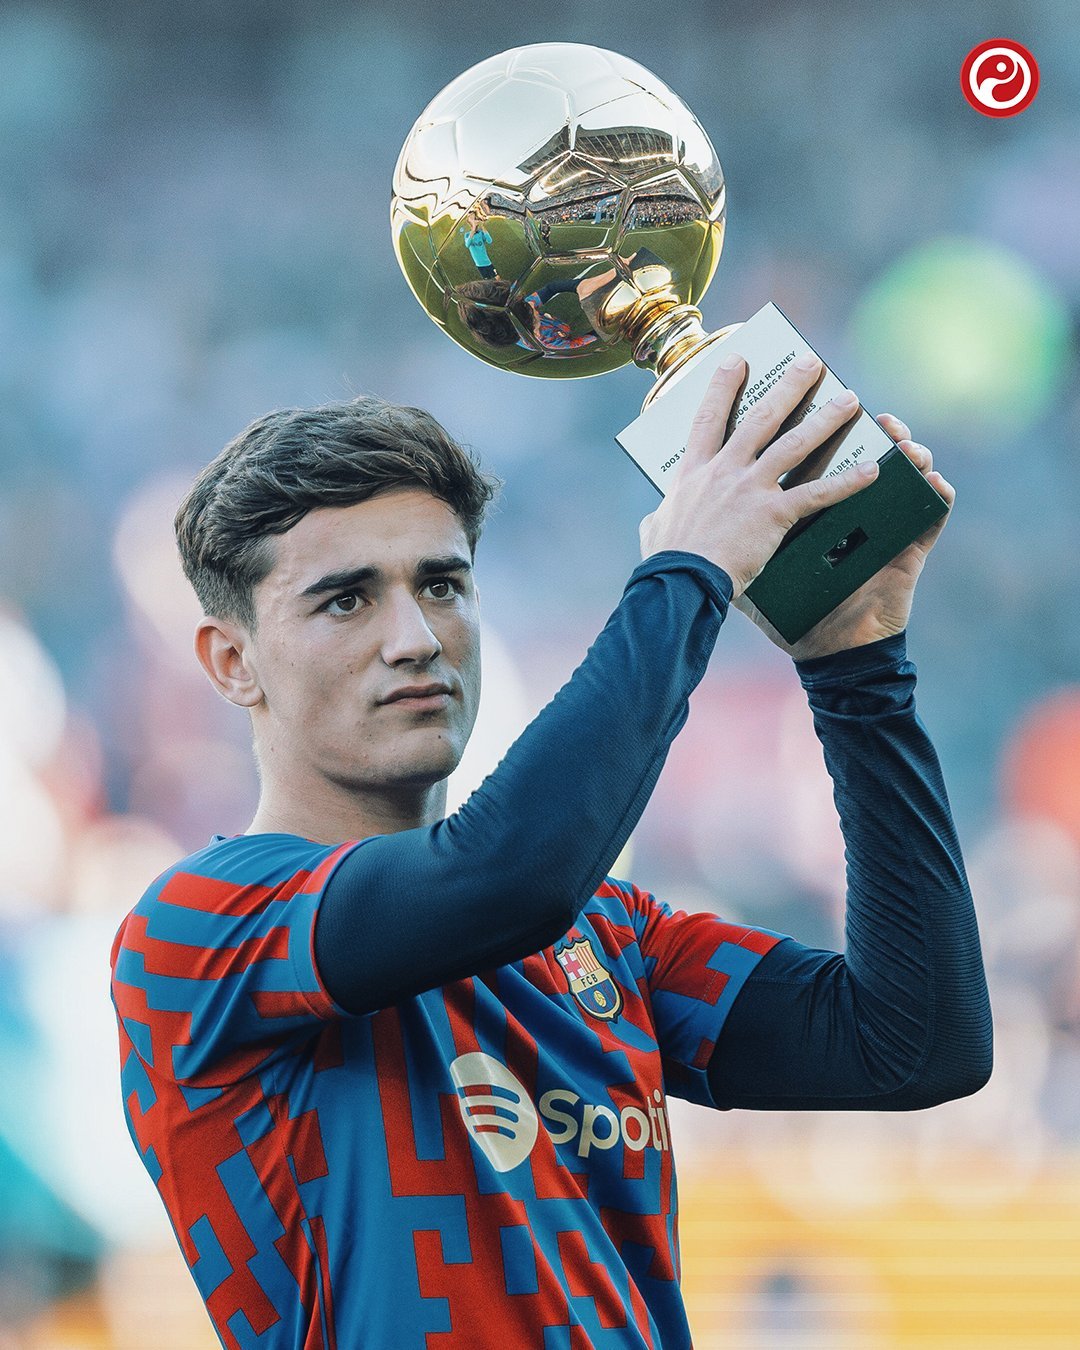 Squawka 18 years and 163 days old, Gavi has been involved all three Barcelona goals against Real Madrid in the final of the Supercopa de España. The Golden Boy